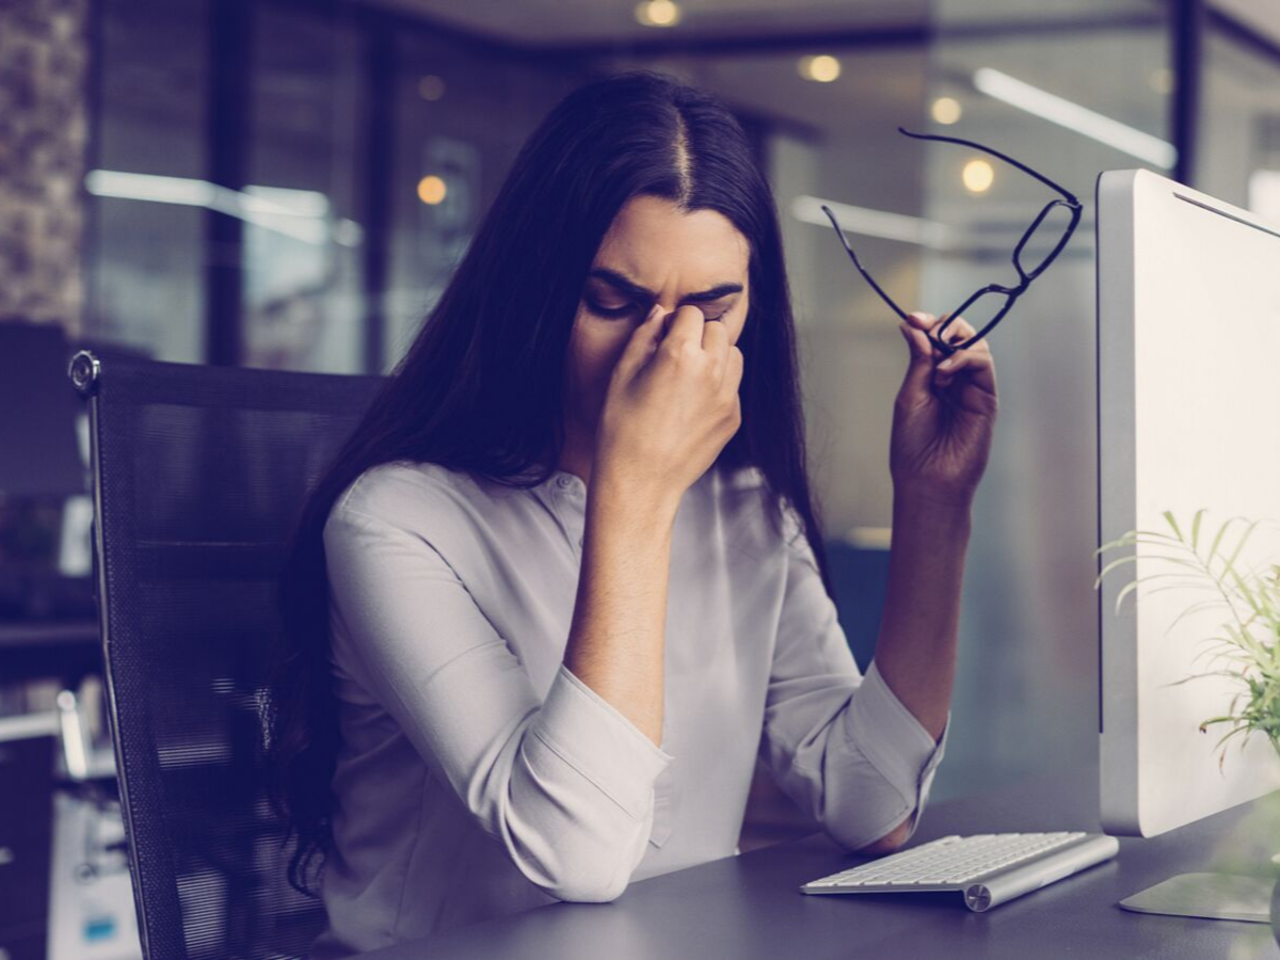 Rage Quitting: How to Prevent Employees from Quitting on the Spot